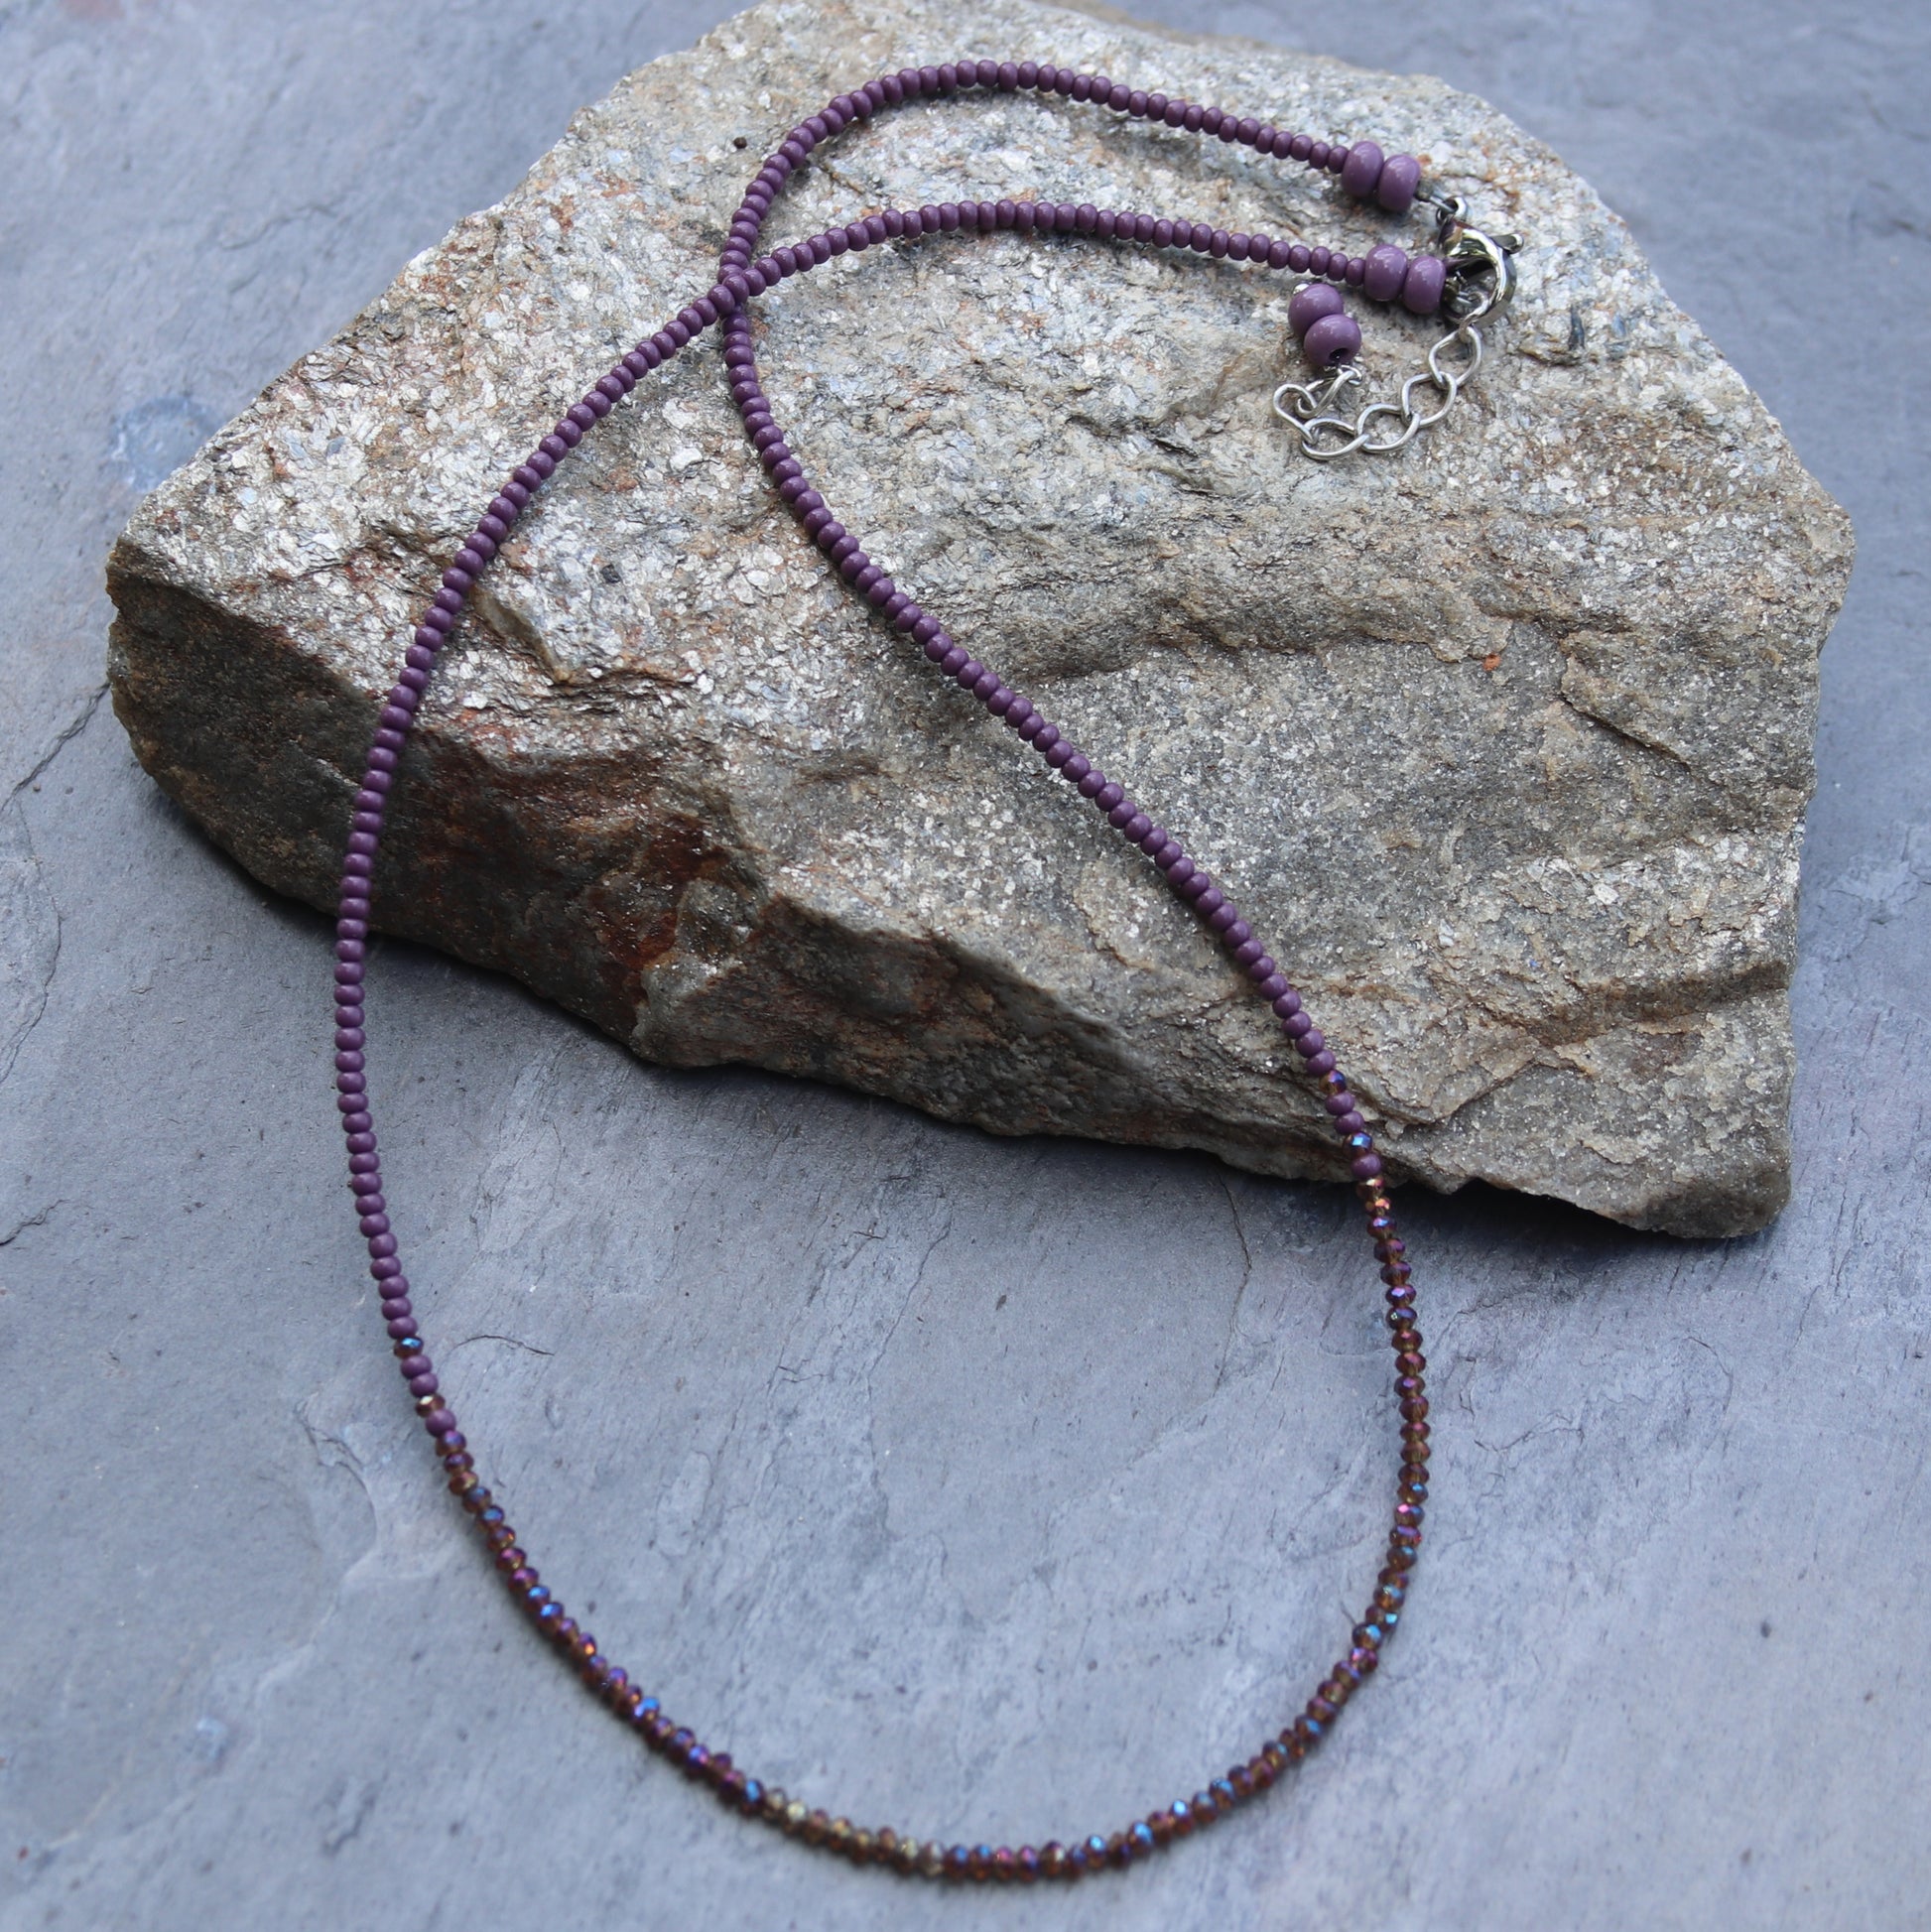 Amethyst micro crystals and seed bead adjustable choker necklace